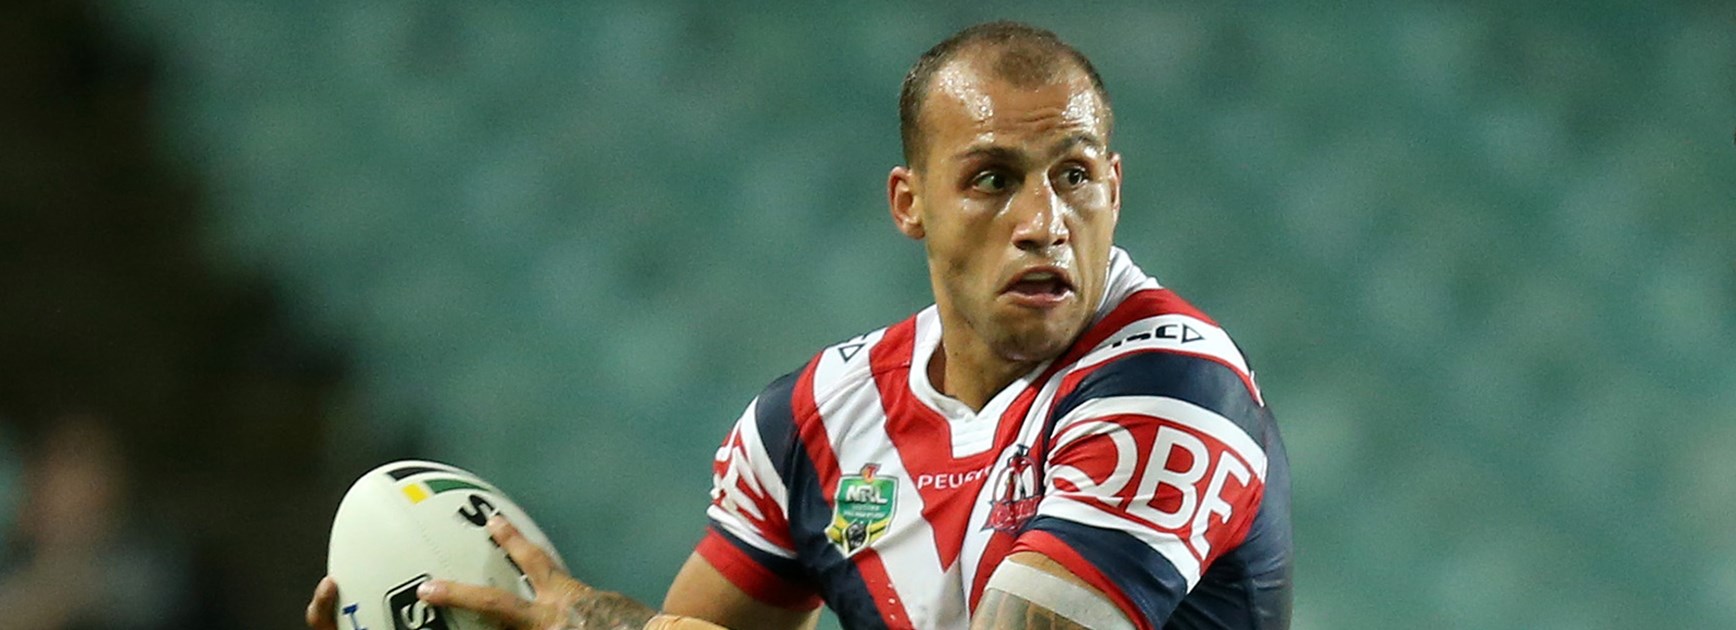 Blake Ferguson scored a hat-trick of tries against the Knights in Round 9 of the Telstra Premiership.